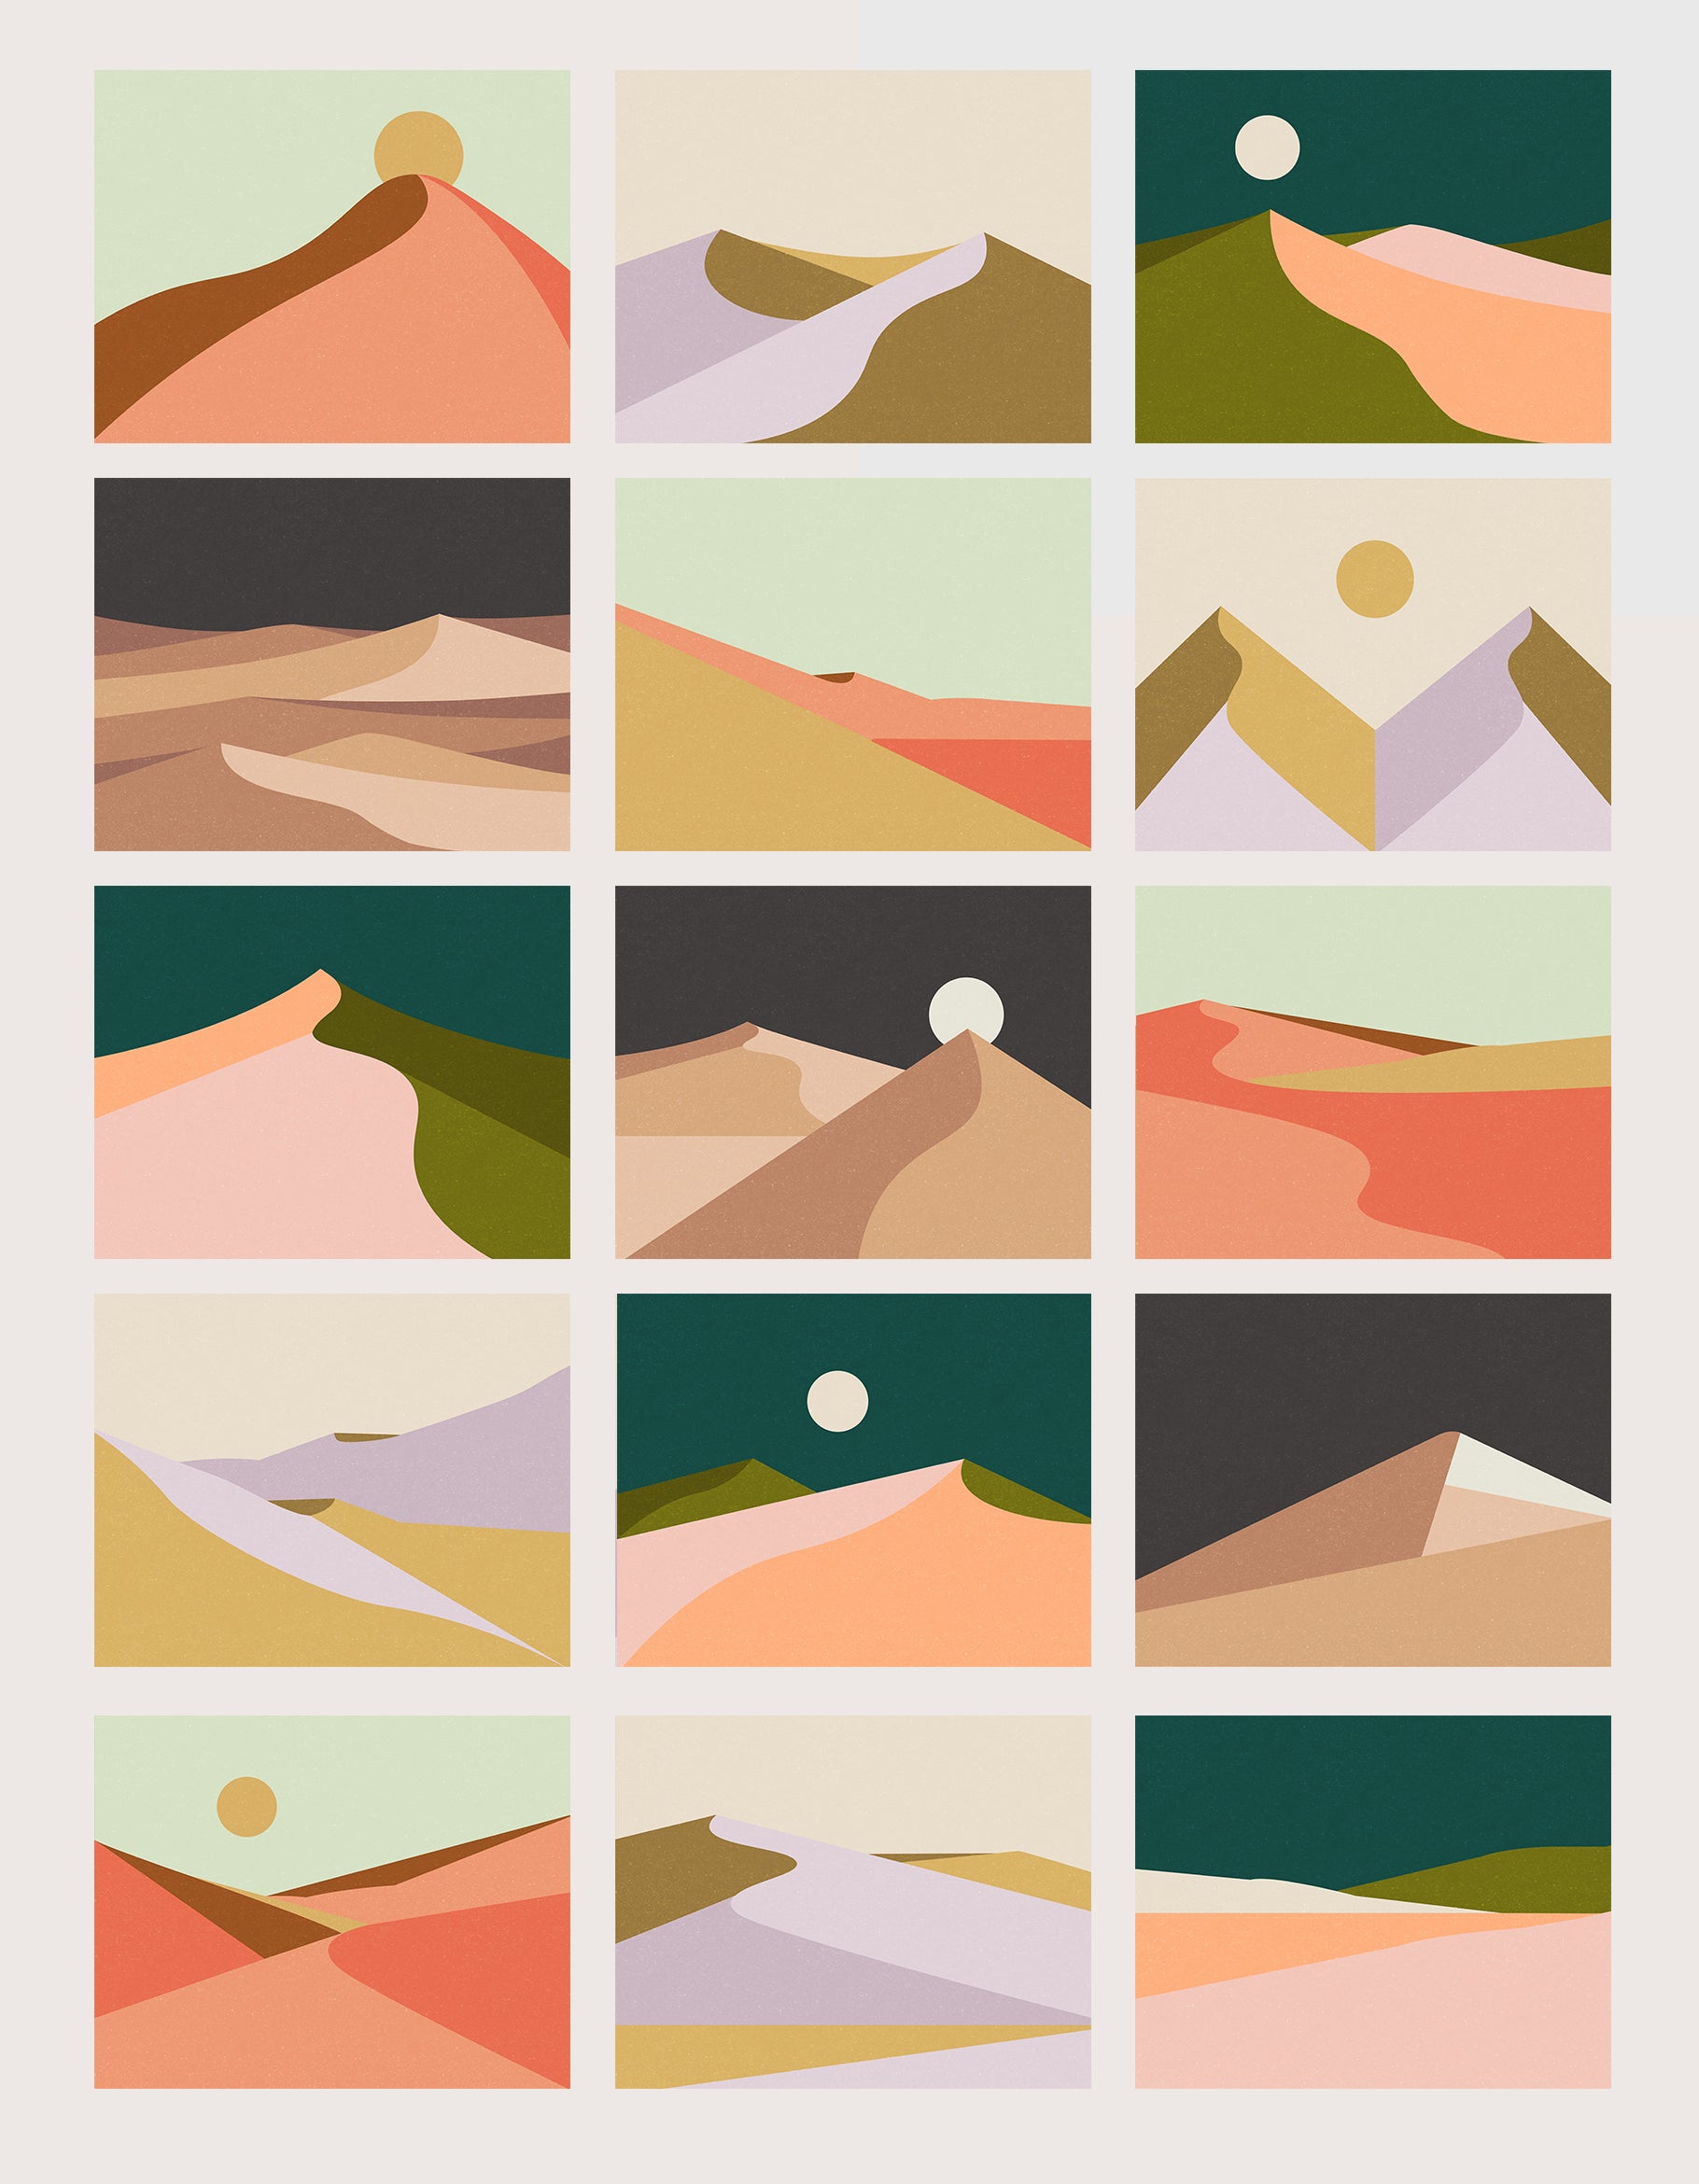 set of fifteen vector illustrations of mountains